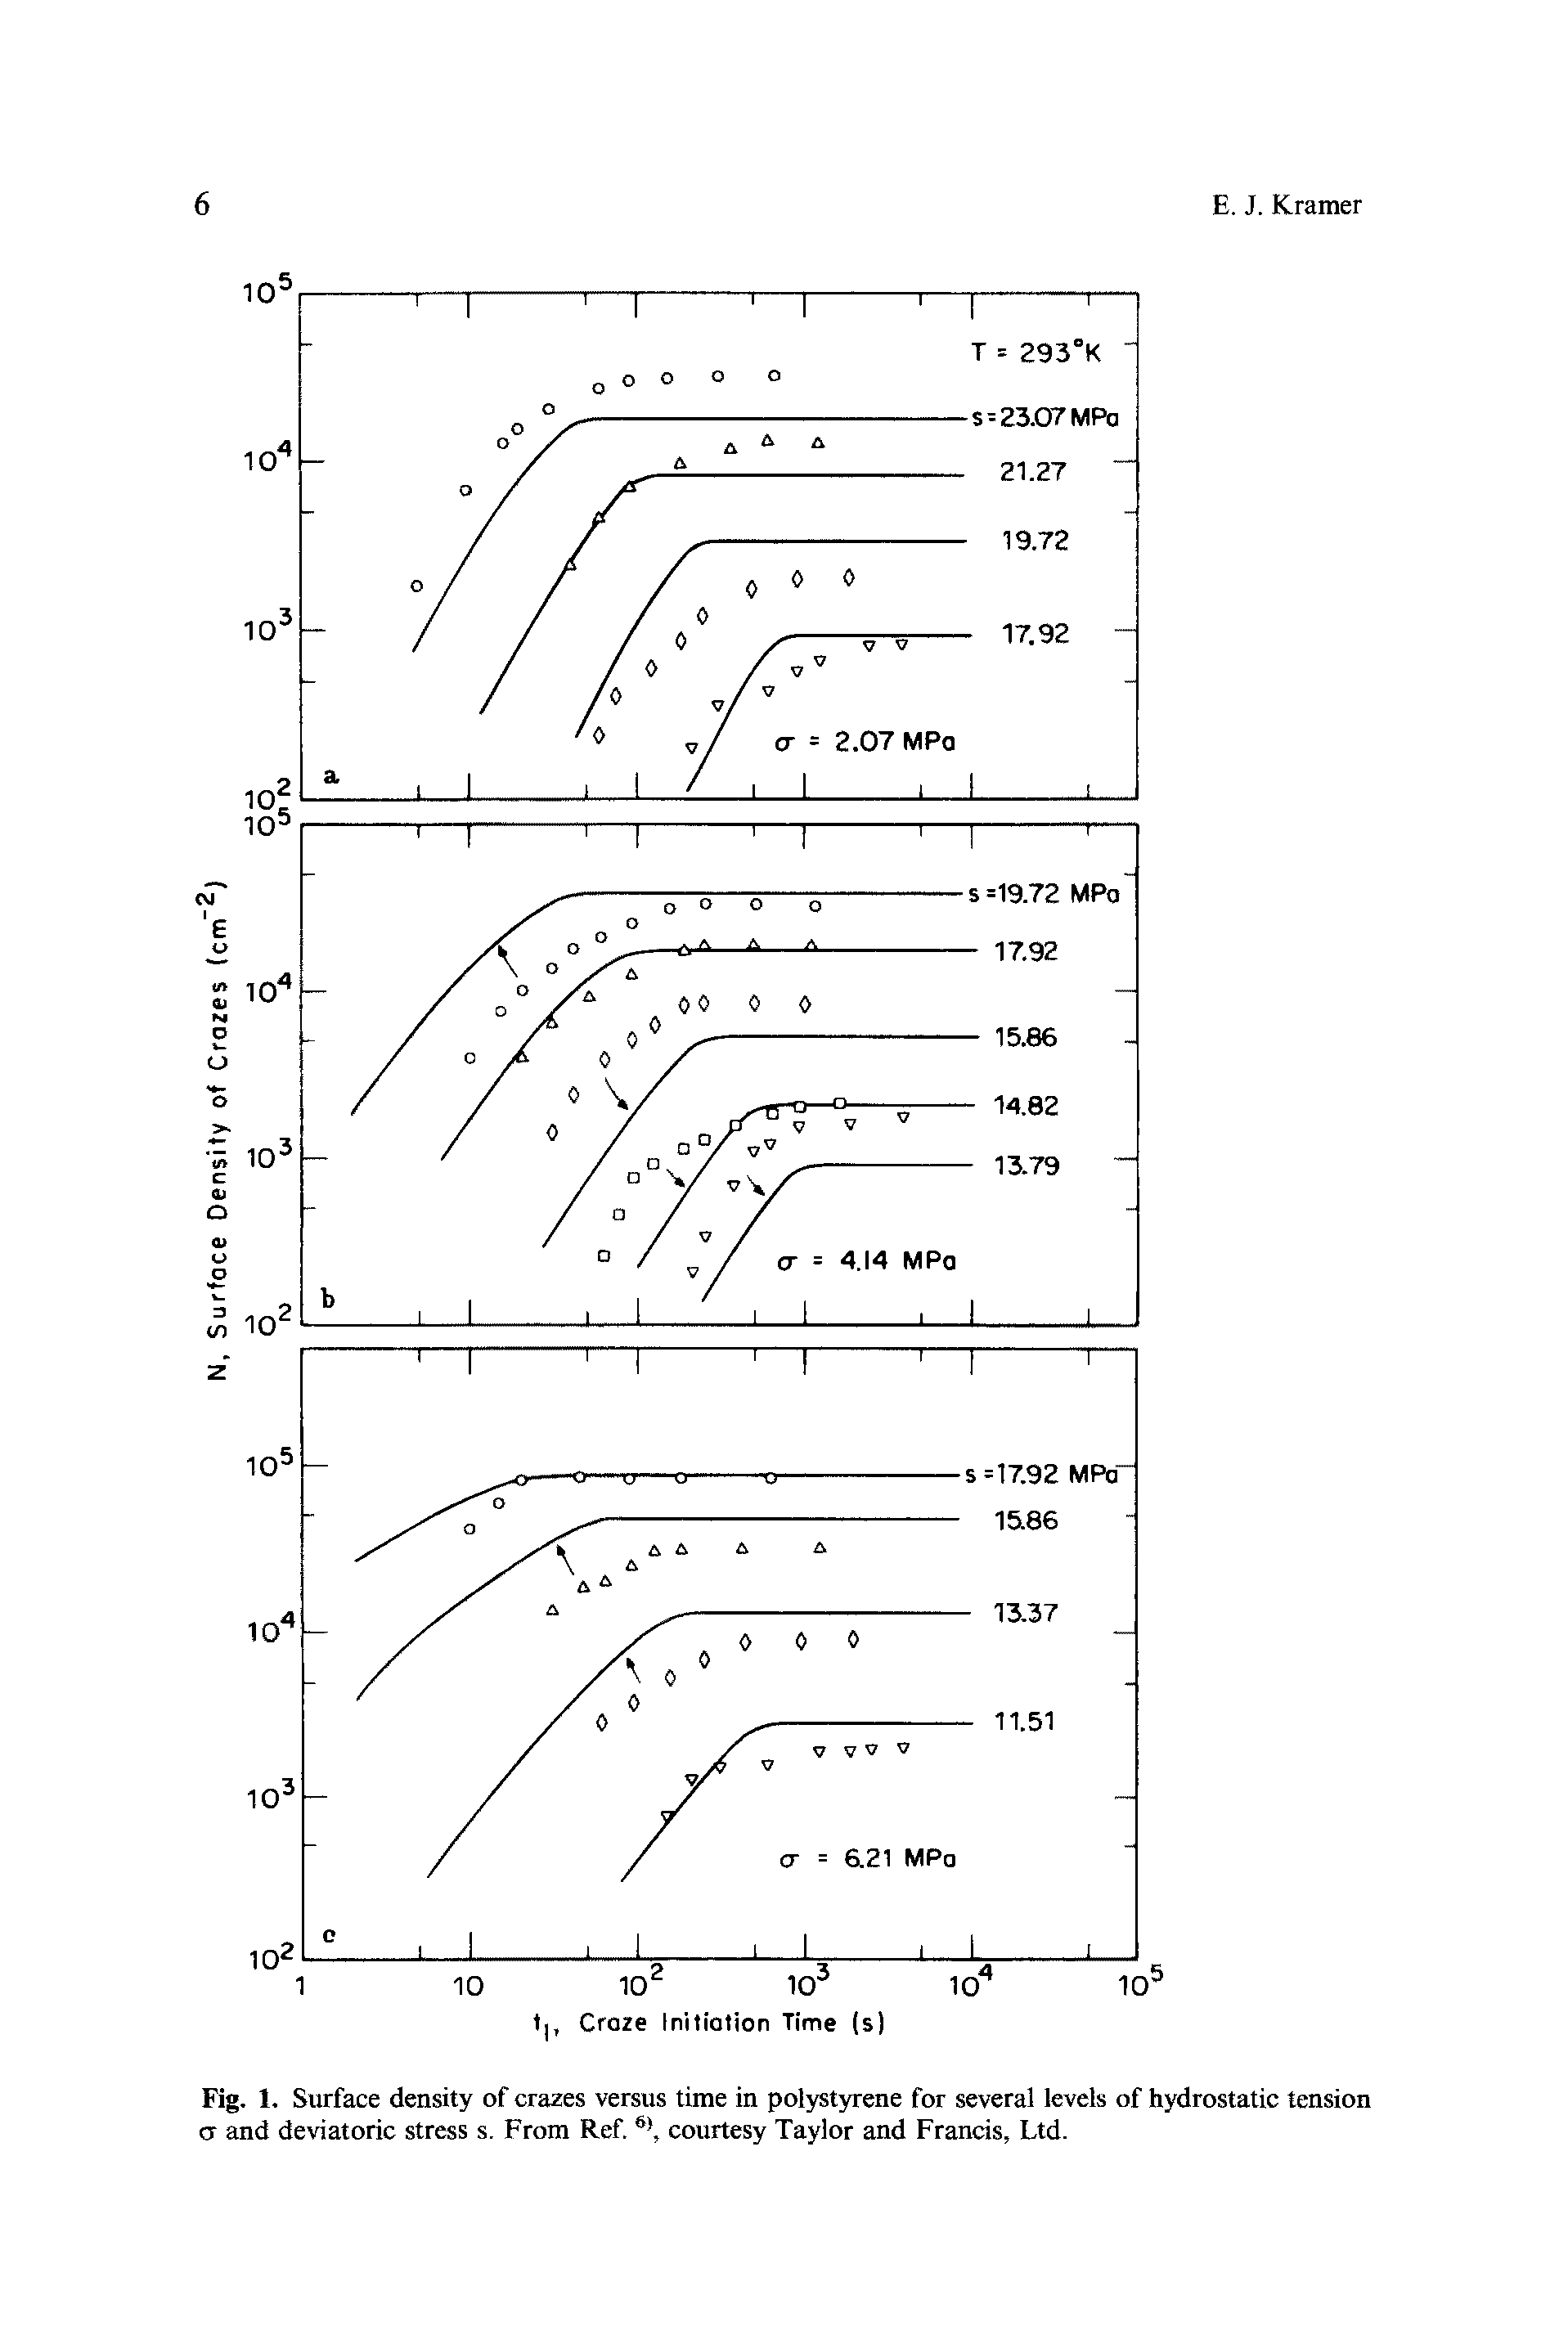 Fig. 1. Surface density of crazes versus time in polystyrene for several levels of hydrostatic tension or and deviatoric stress s. From Ref. , courtesy Taylor and Francis, Ltd.